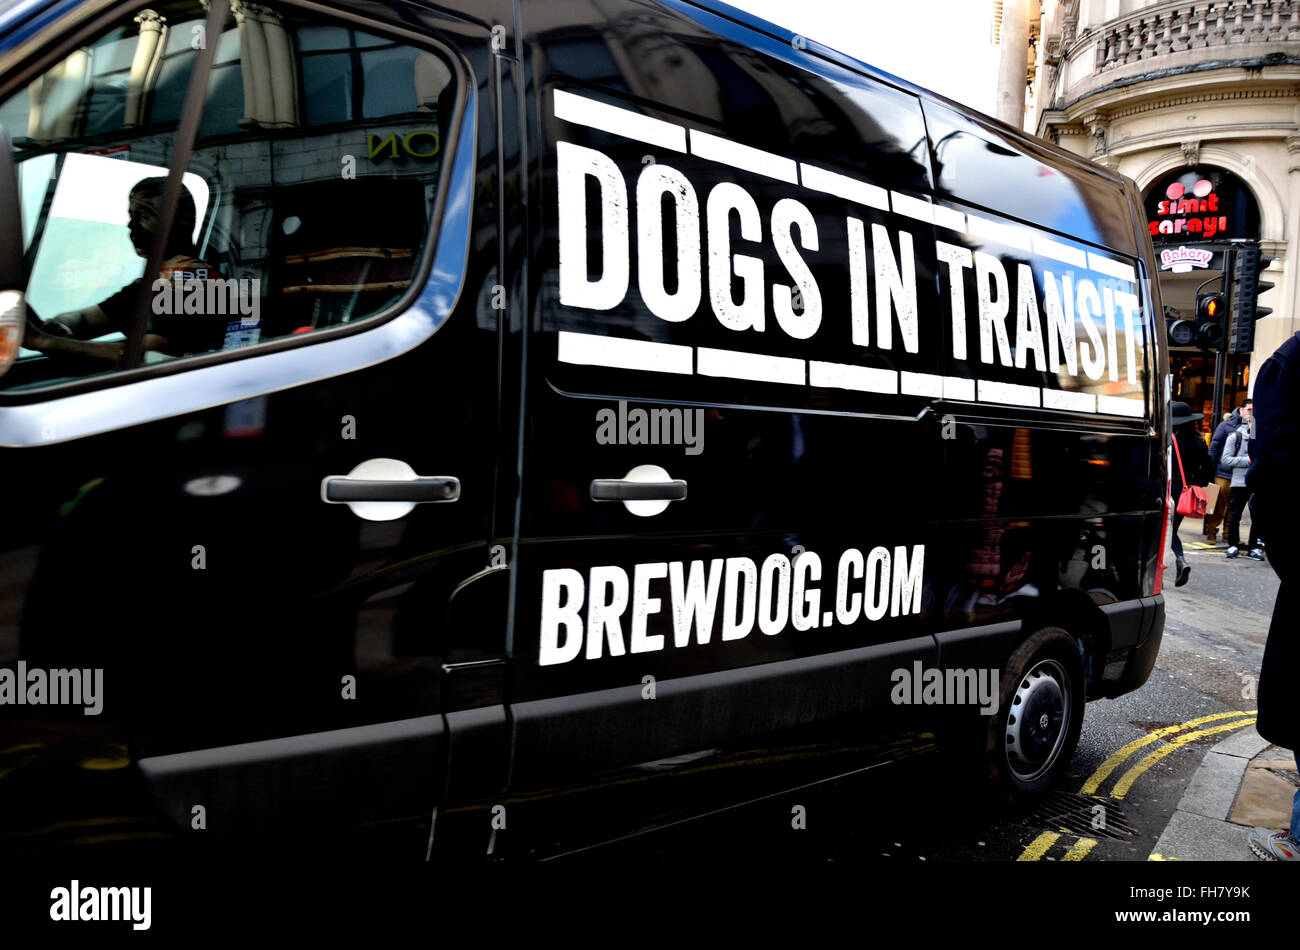 London, England, UK. 'Dogs in Transit' - Brewdog.com van delivering beer in Piccadilly Circus Stock Photo